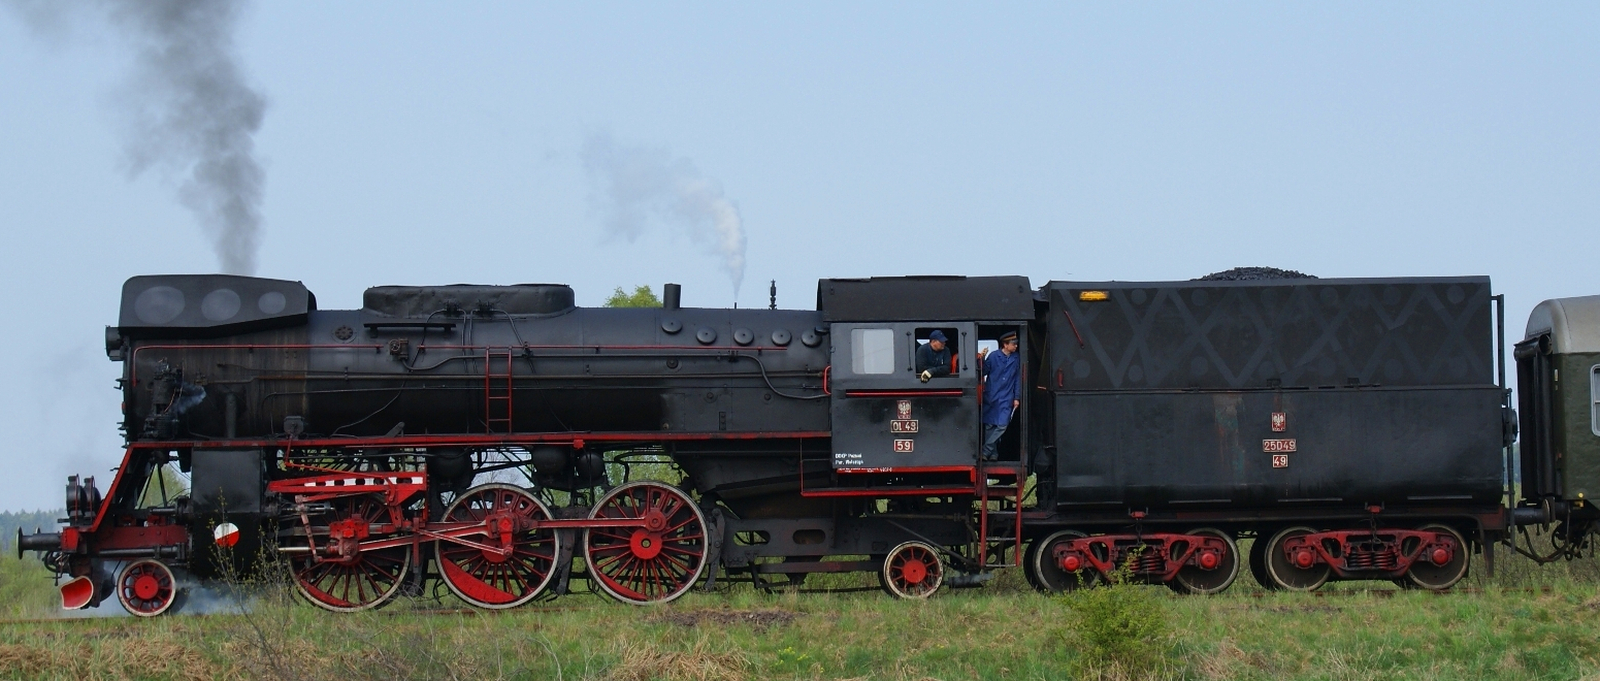 Ol49-59 in April 2009 in front of a special train